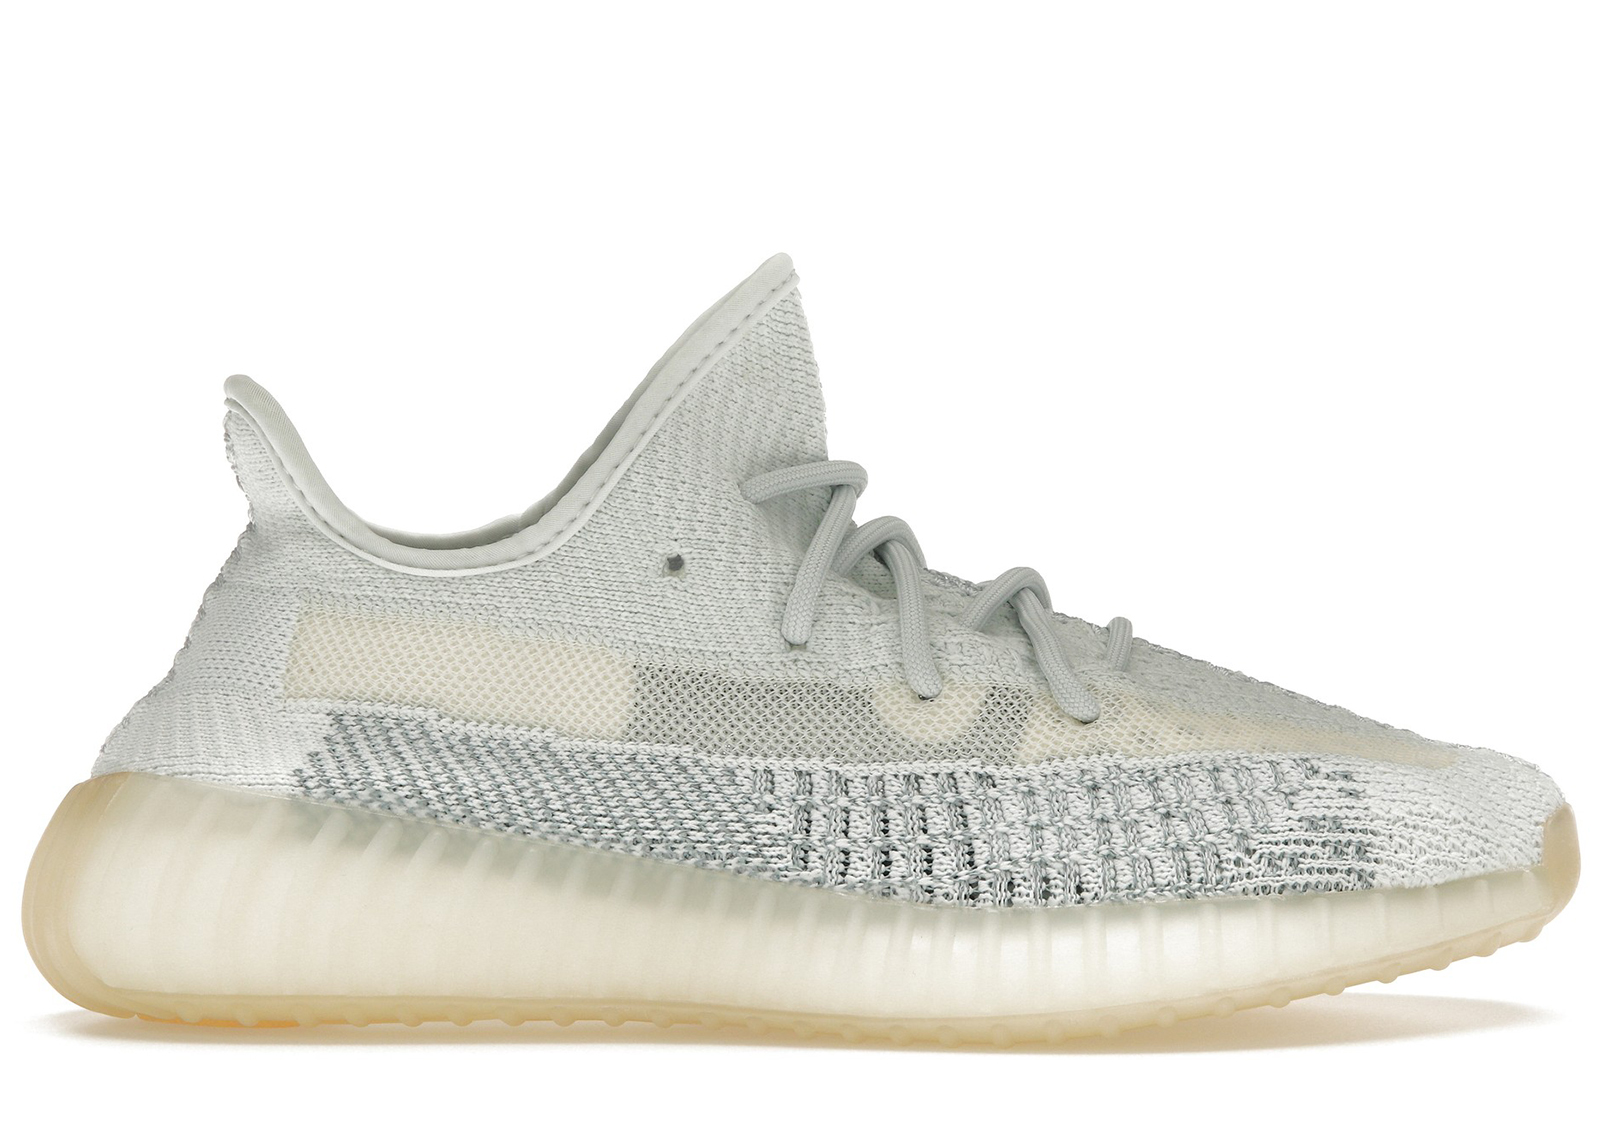 adidas yeezy 350 white release date